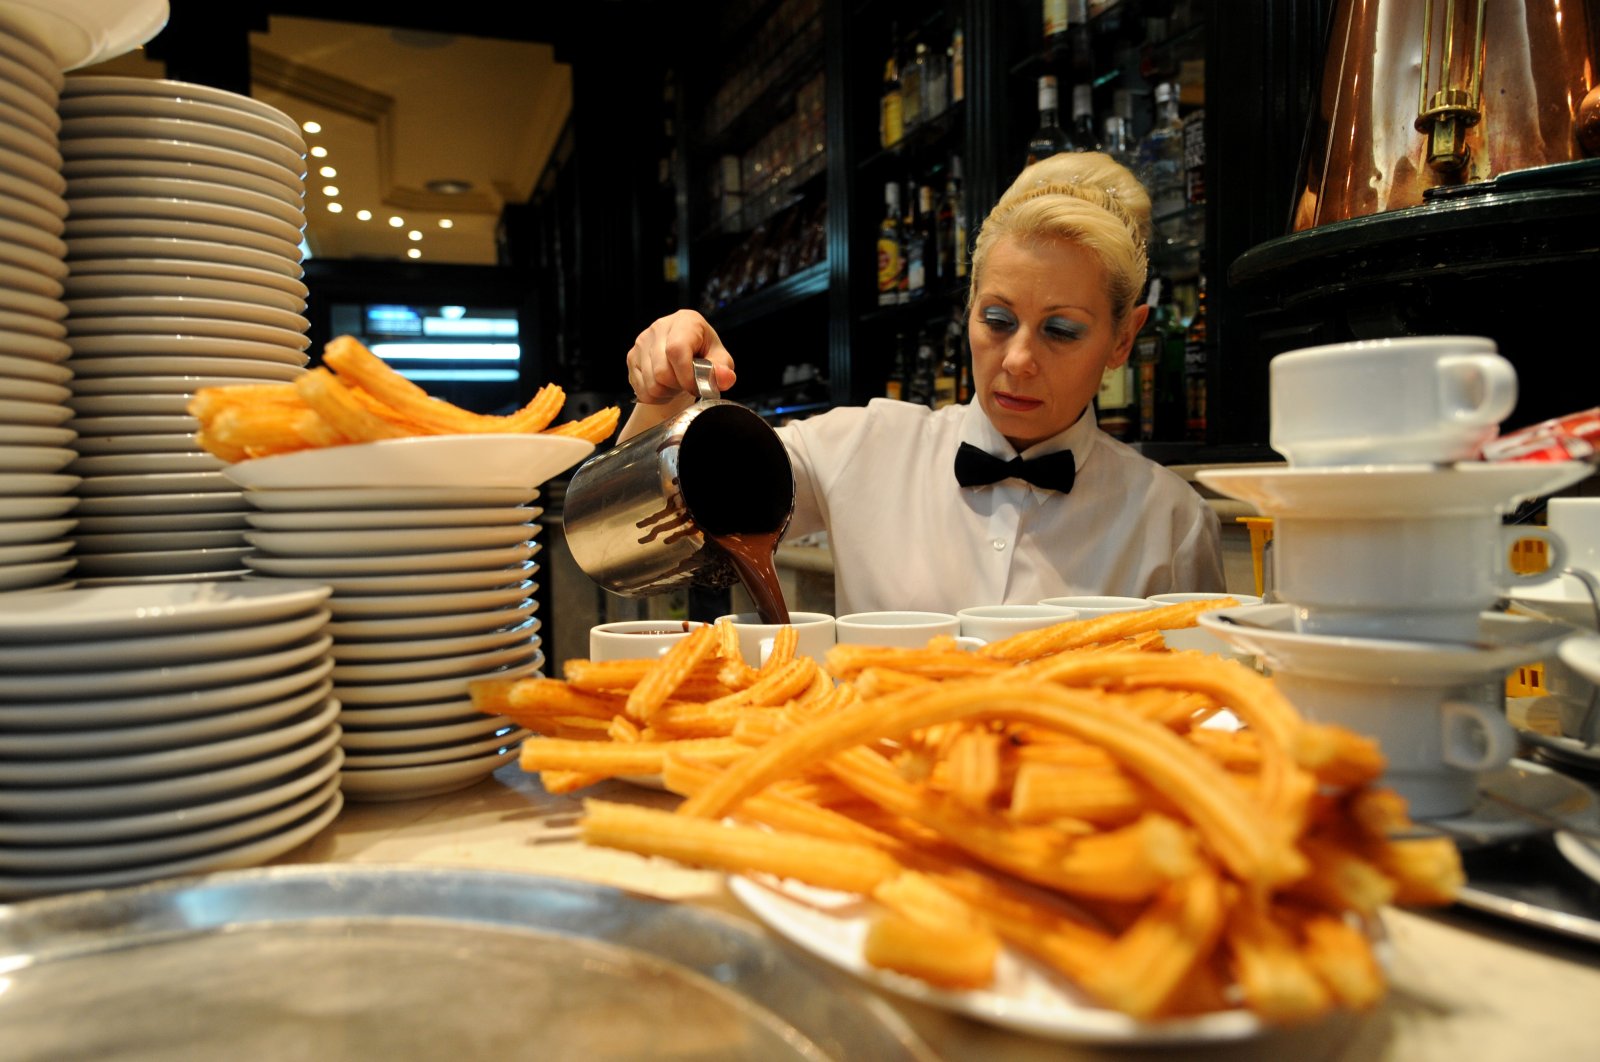 A waitress pours hot chocolate into cups to be served with Churros at the San Gines Chocolateria, Madrid, Spain, Oct. 23, 2009. (Getty Images Photo)